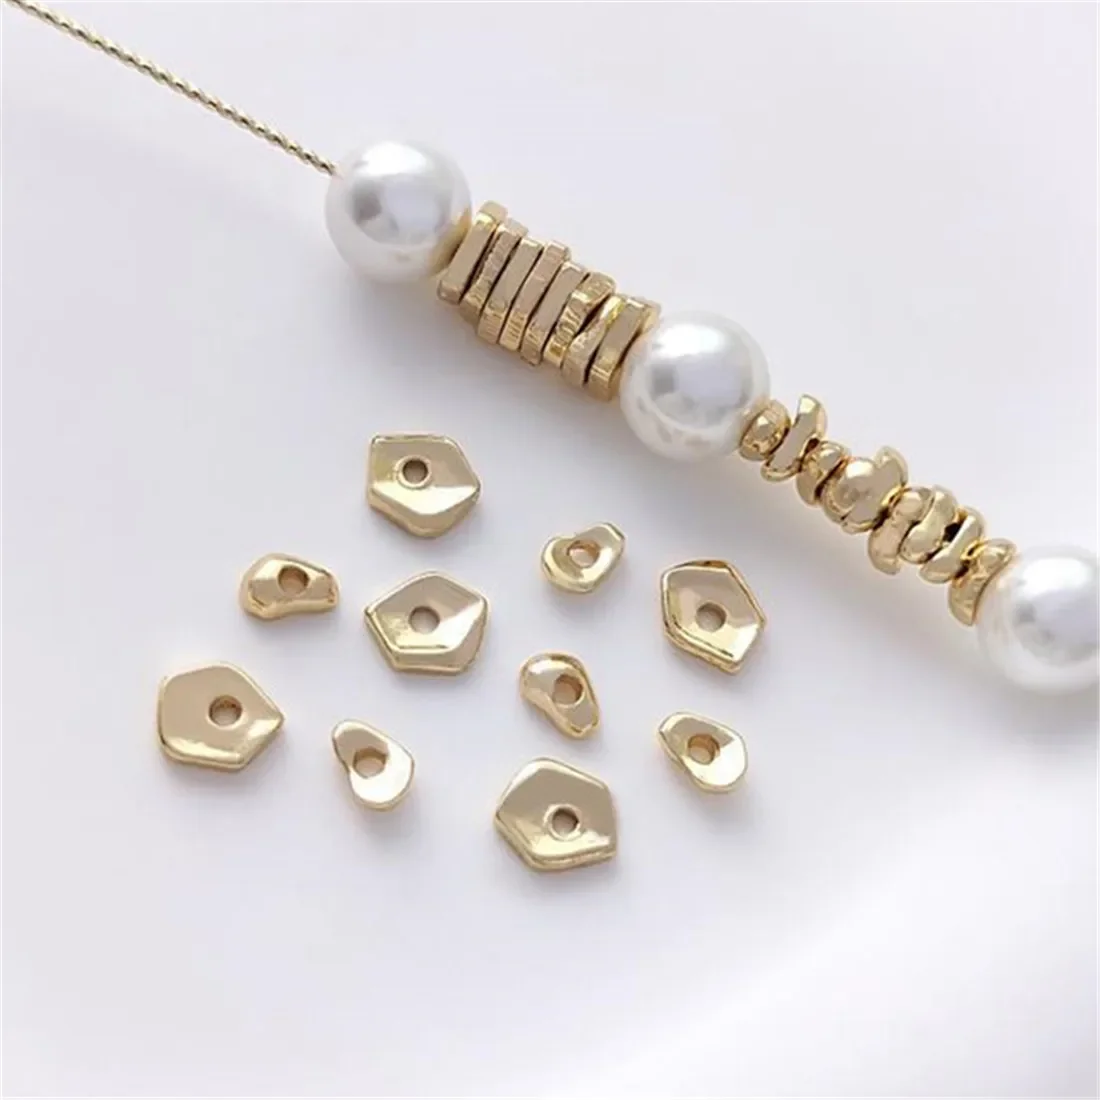 

14K Gold-filled Irregular Beads, Small Broken Gold Special-shaped Spacers, Handmade Beaded Accessories, DIY Jewelry Materials